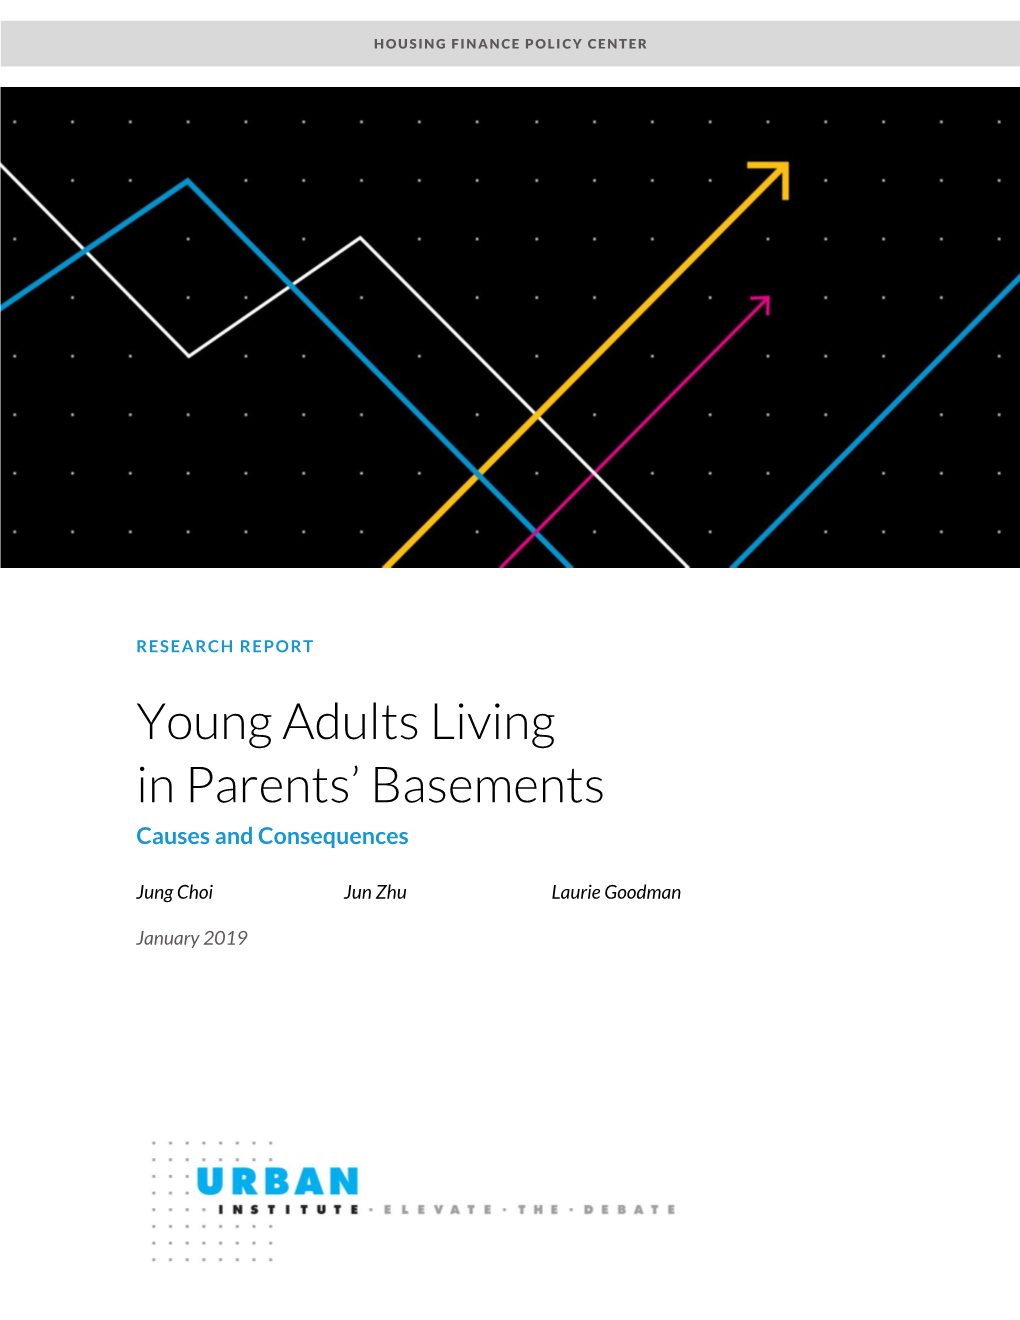 Young Adults Living in Parents' Basements